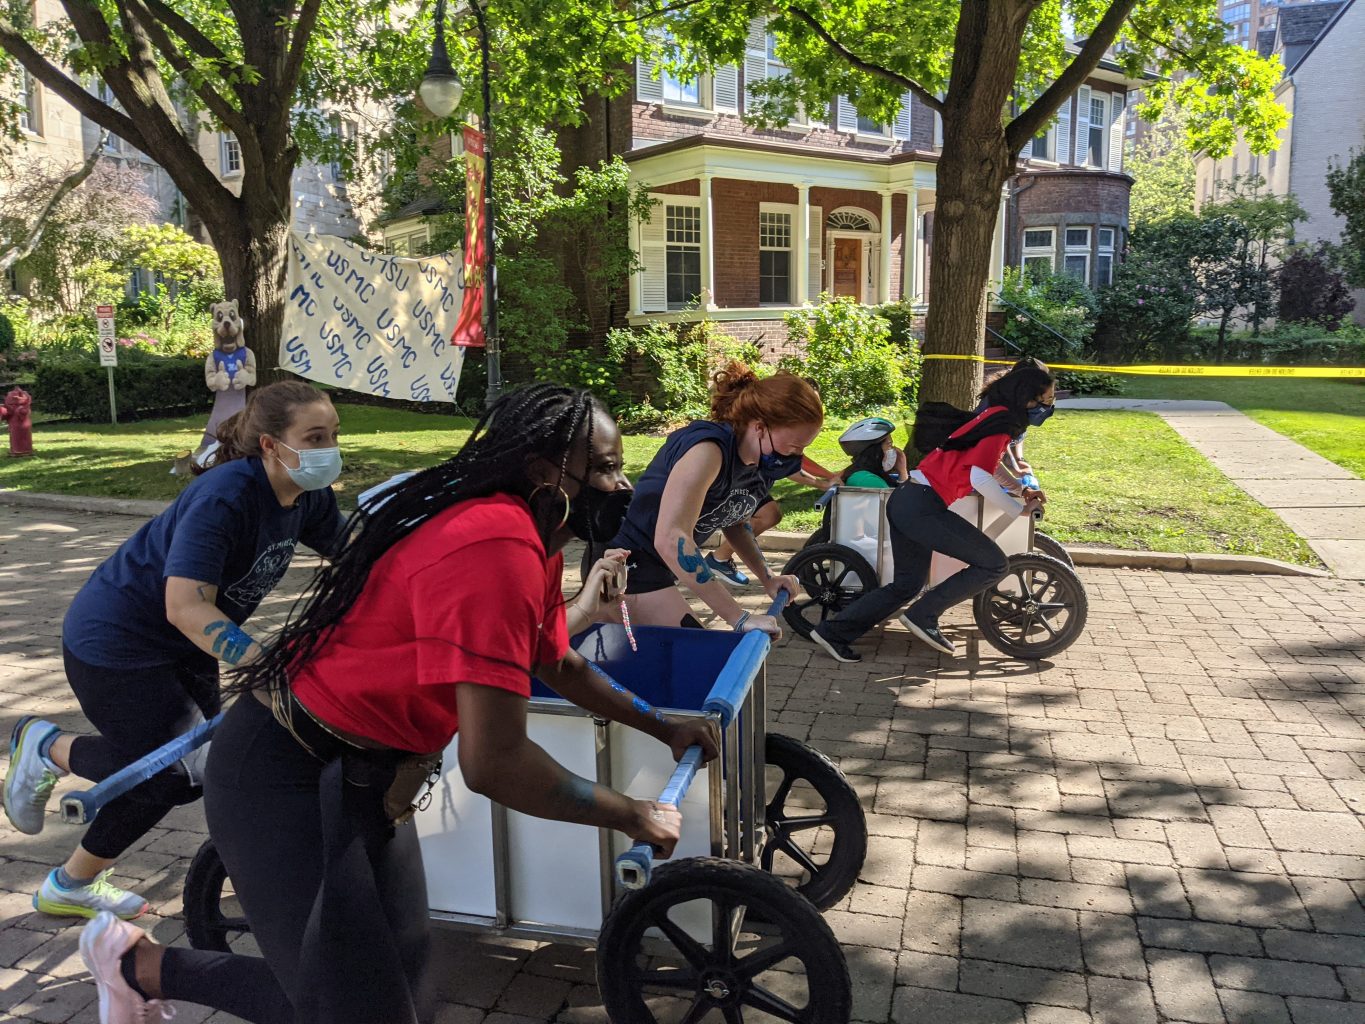 Photograph of the St. Mike's bed race on Elmsley Lane: two teams of three push wheeled carts with a fourth, helmeted team member sitting inside